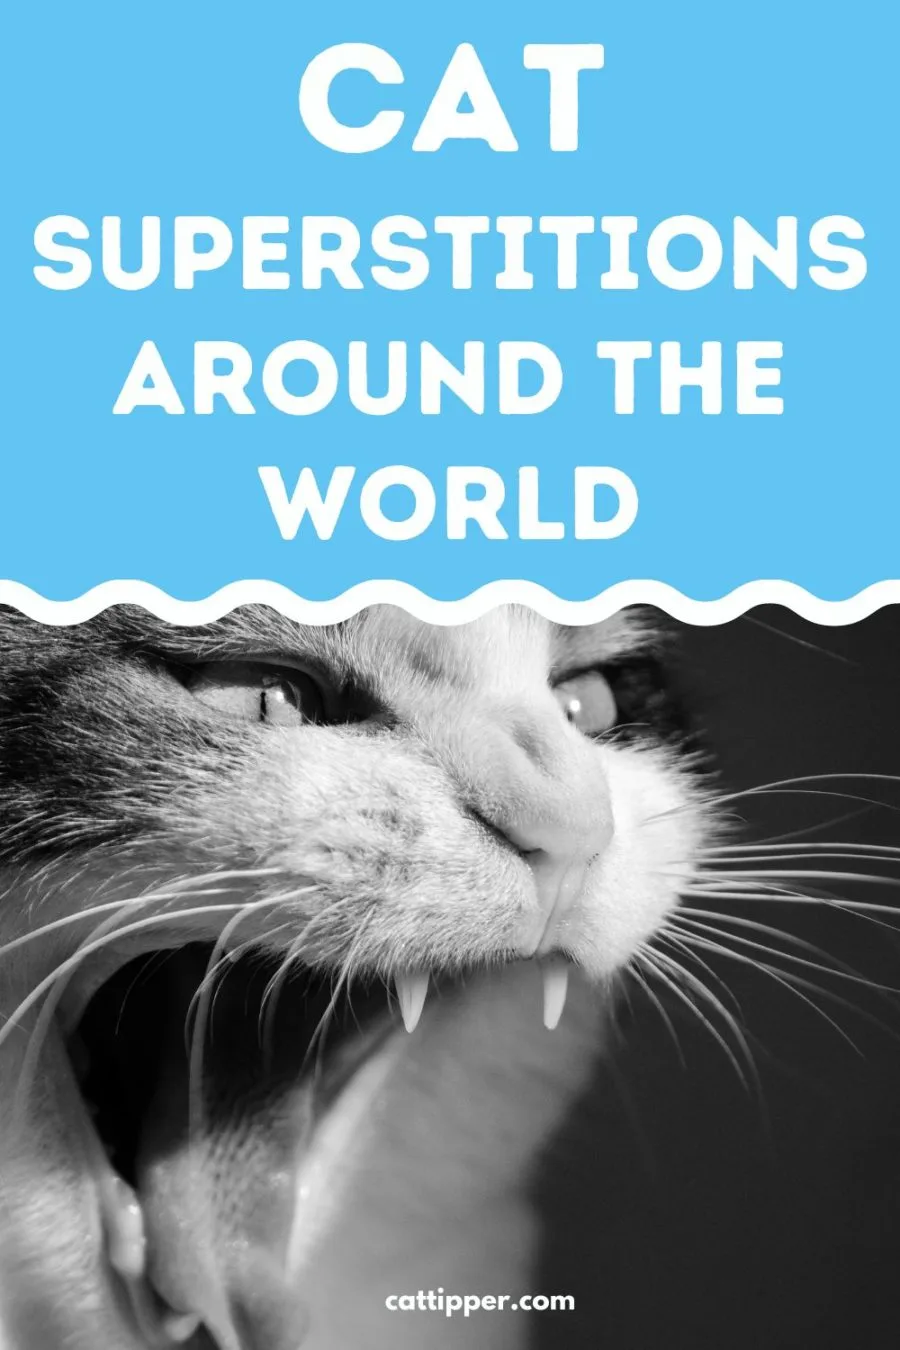 Cat Superstitions Around the World with photo of hissing cat